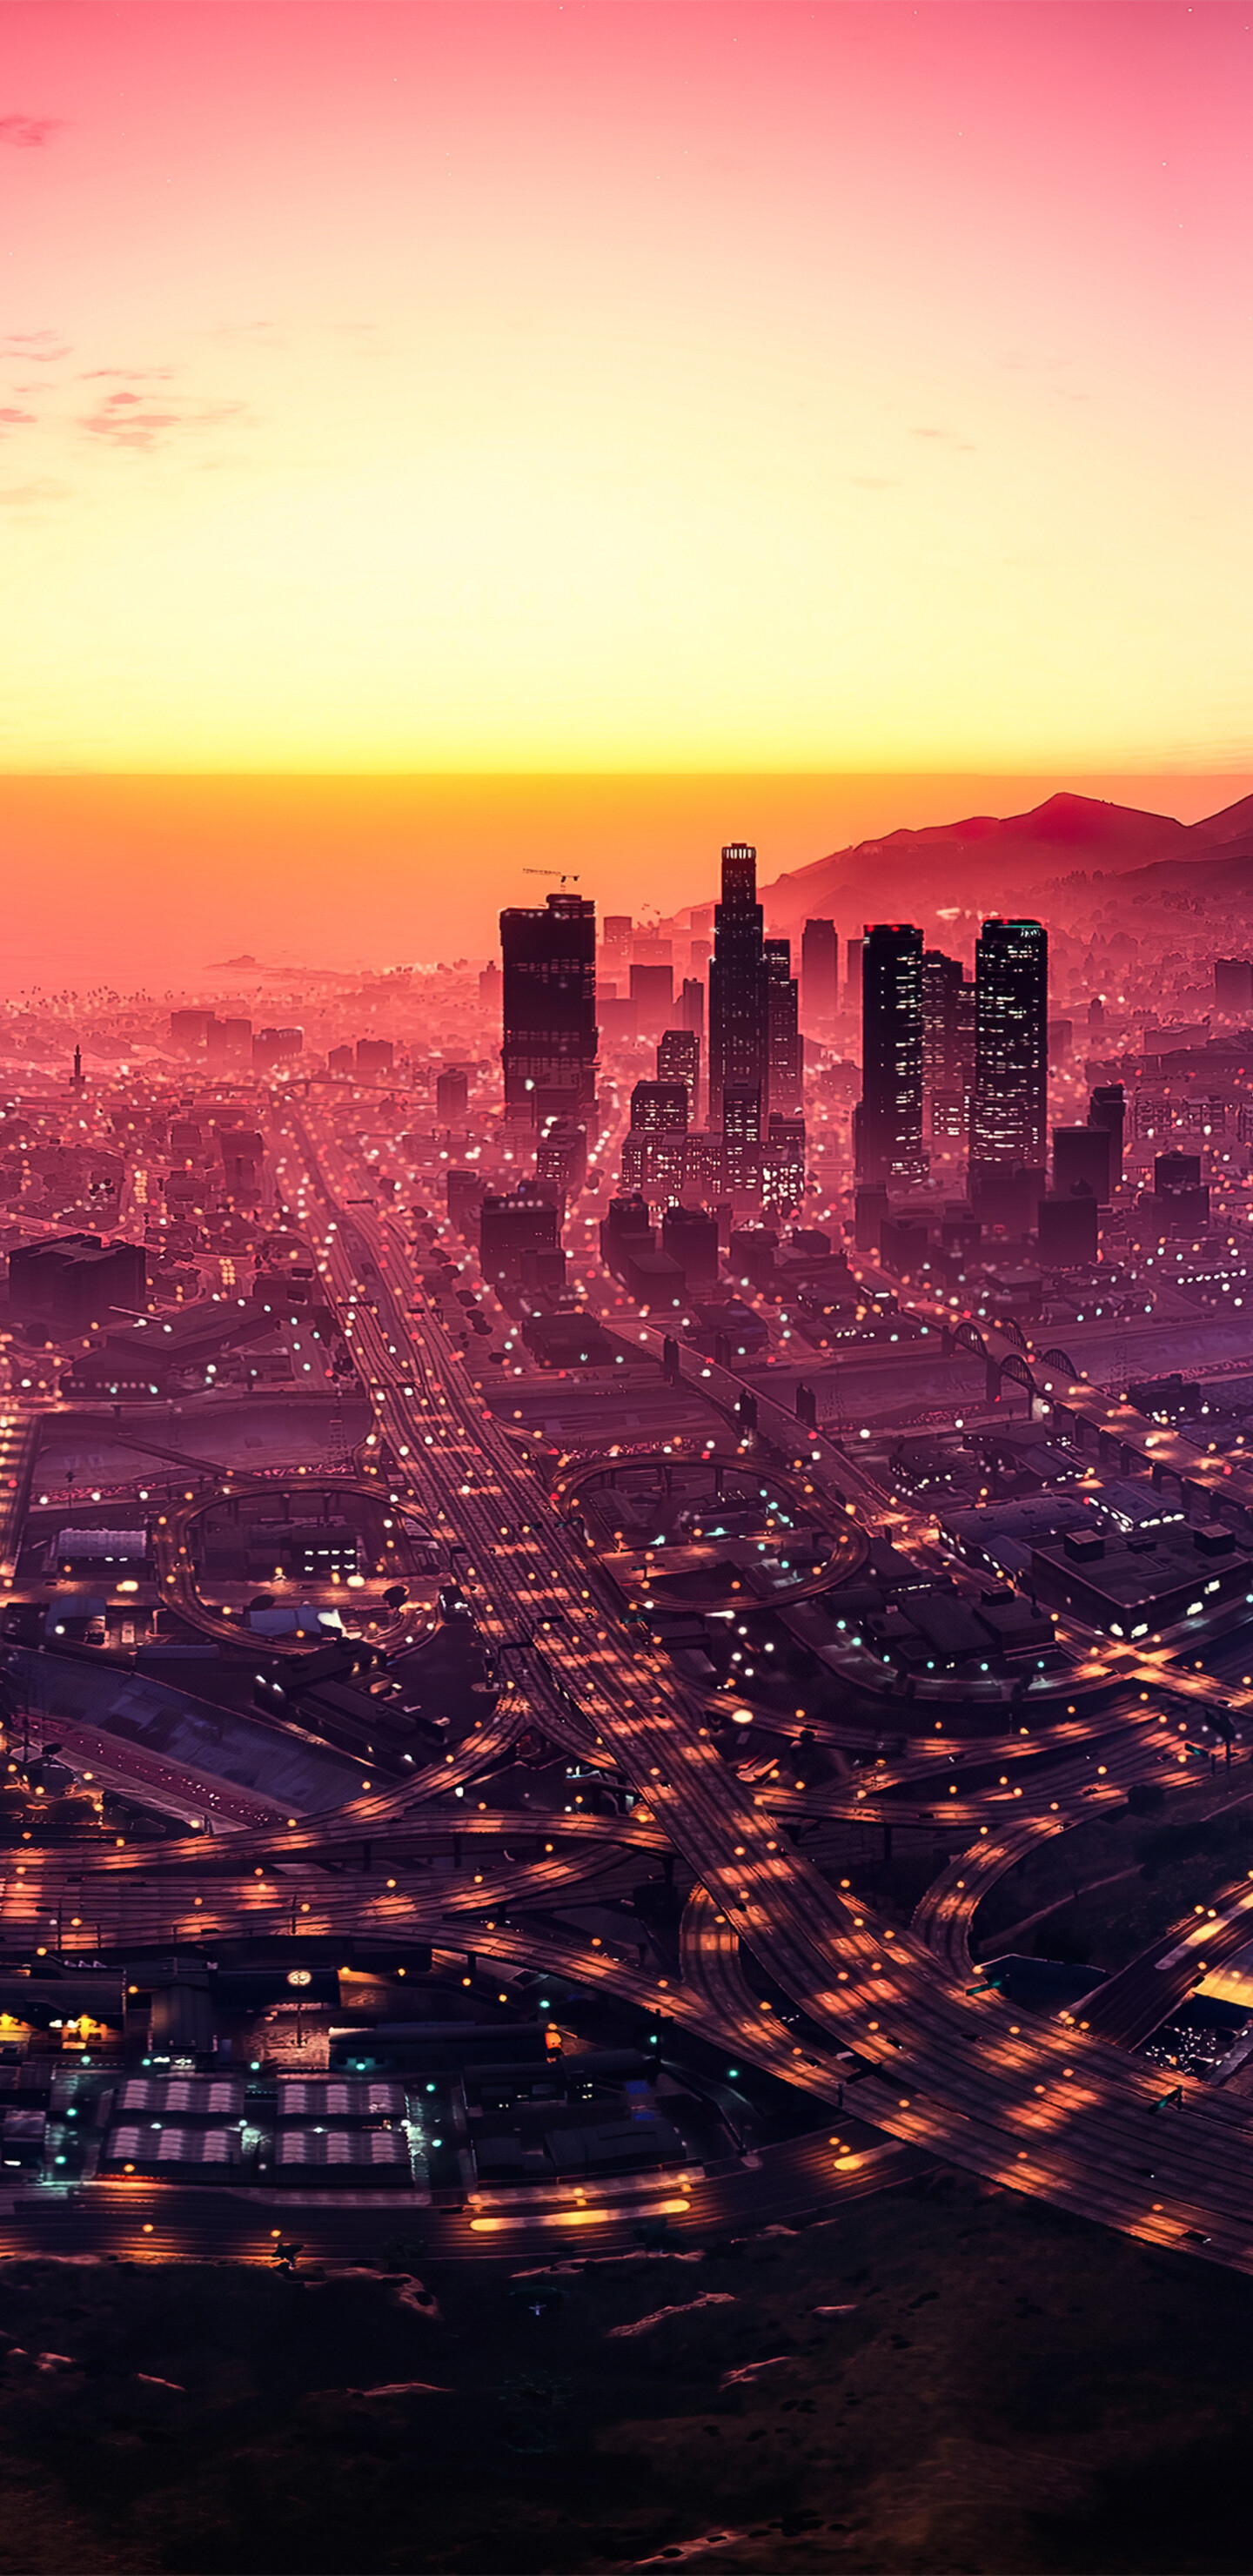 Grand Theft Auto 5: The fictional city of Los Santos, based on Los Angeles. 1440x2960 HD Background.